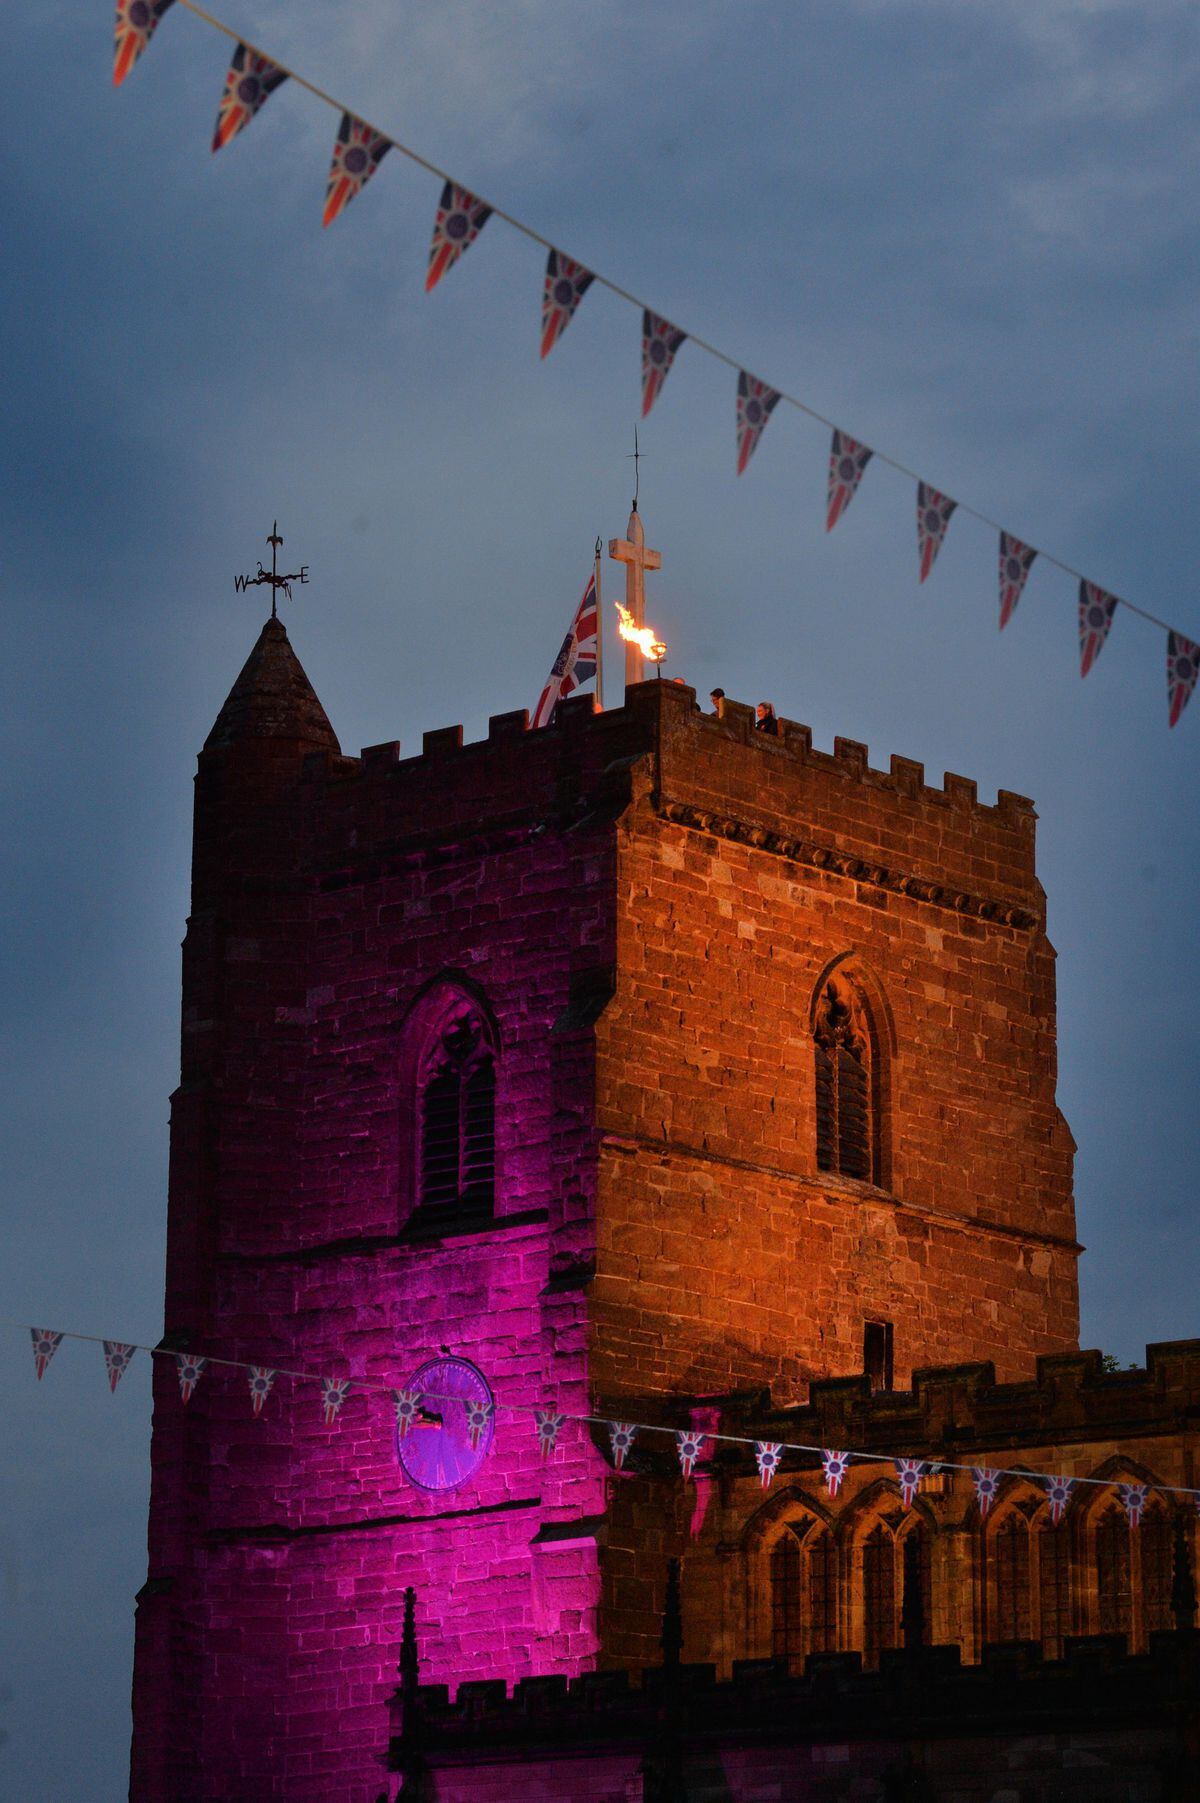 The beacon is on top of St Nicholas Church tower